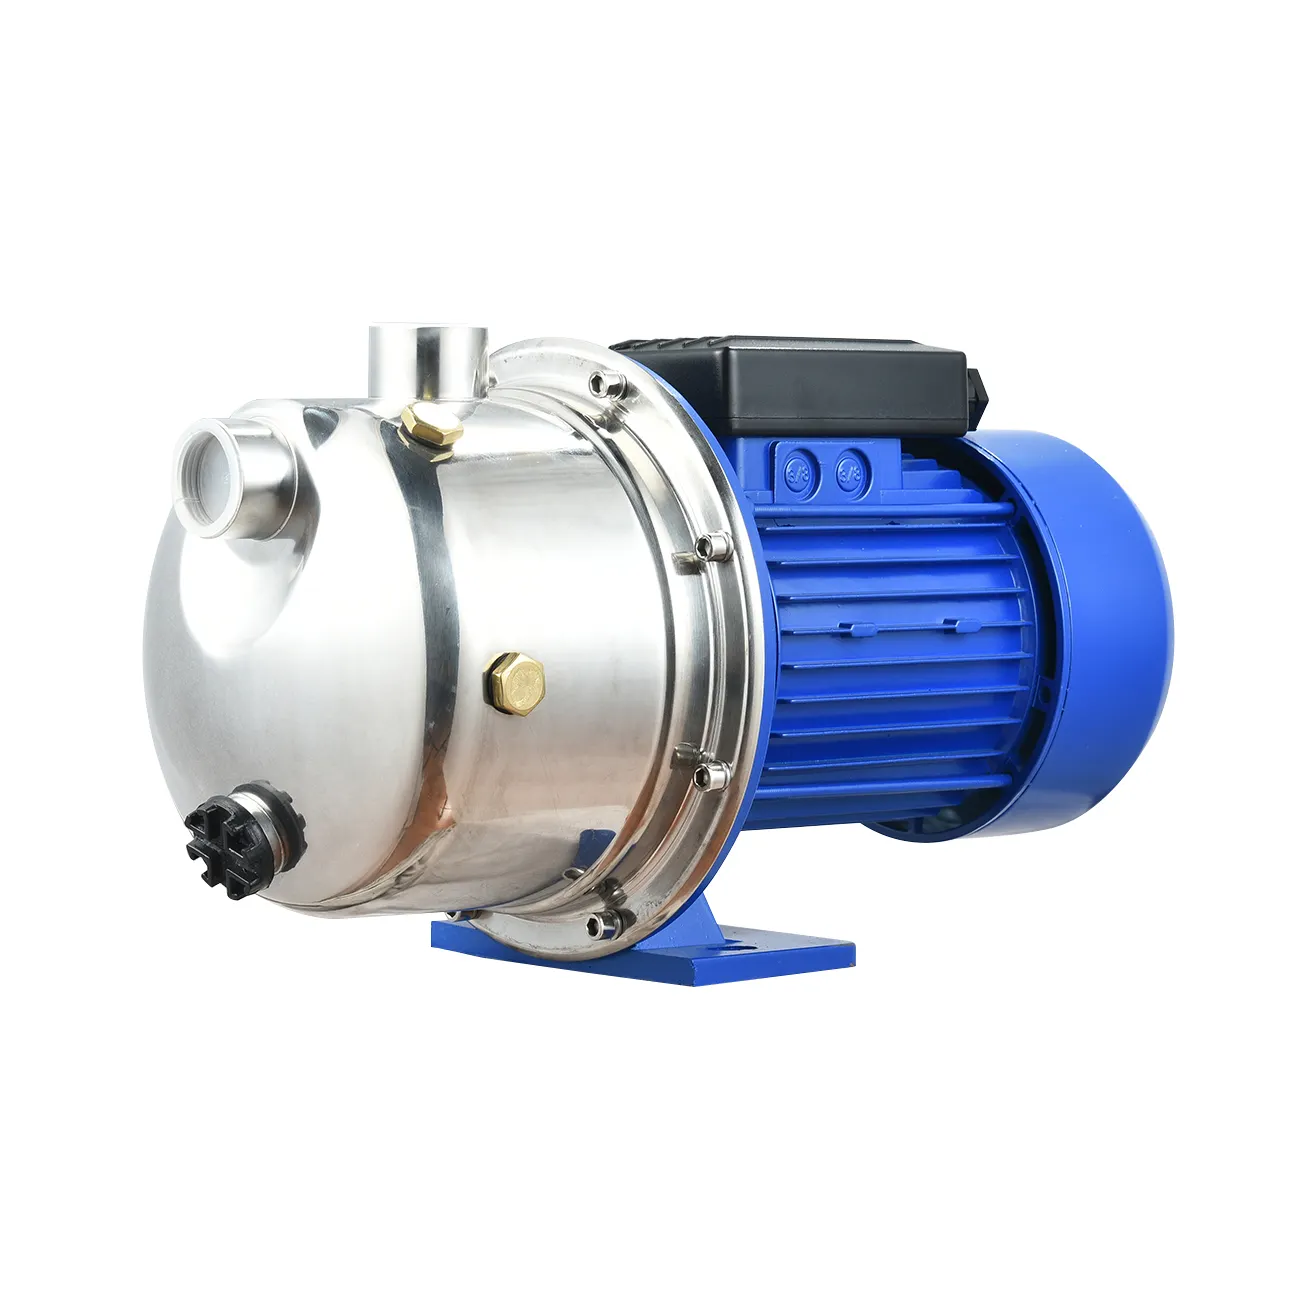 JS 80 series 0.75hp 550w 220v Stainless steel 220V booster pump household self suction jet pump